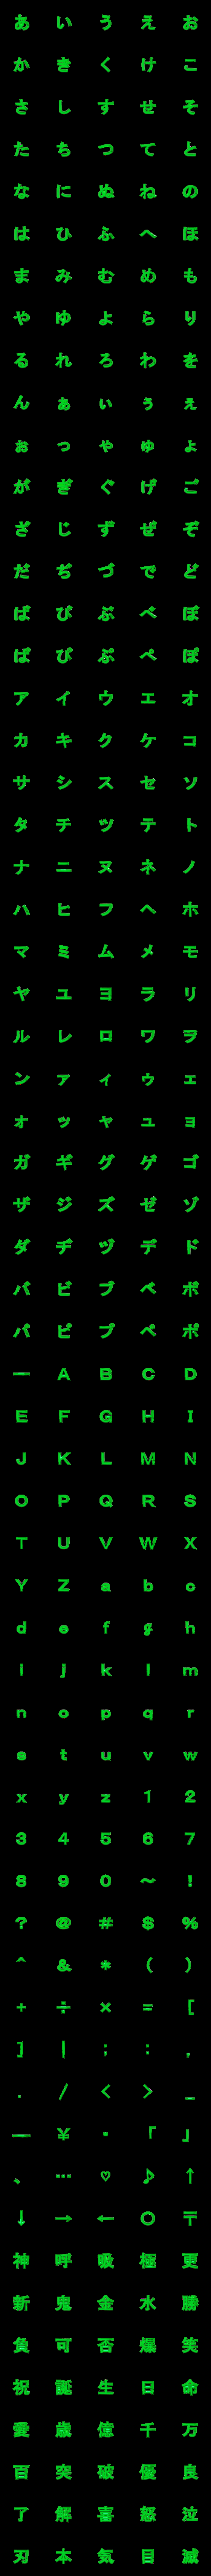 [LINE絵文字]左右ジャンプゴシック体1.1(緑)の画像一覧